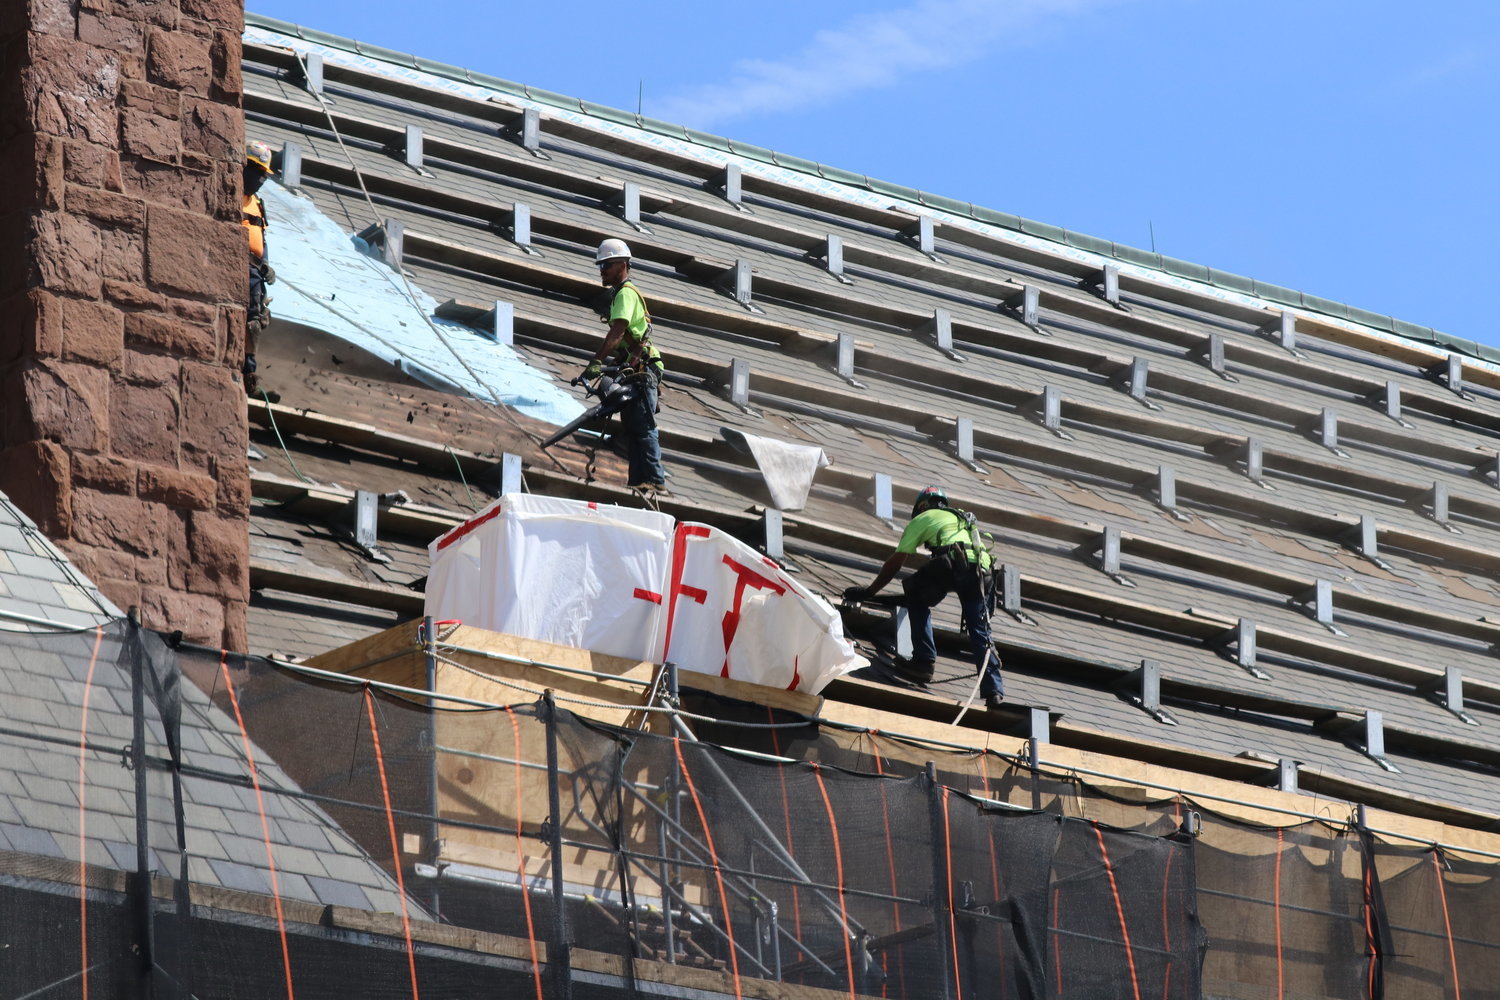 Contractors in the early weeks of the project prepare the roof for new tiles.